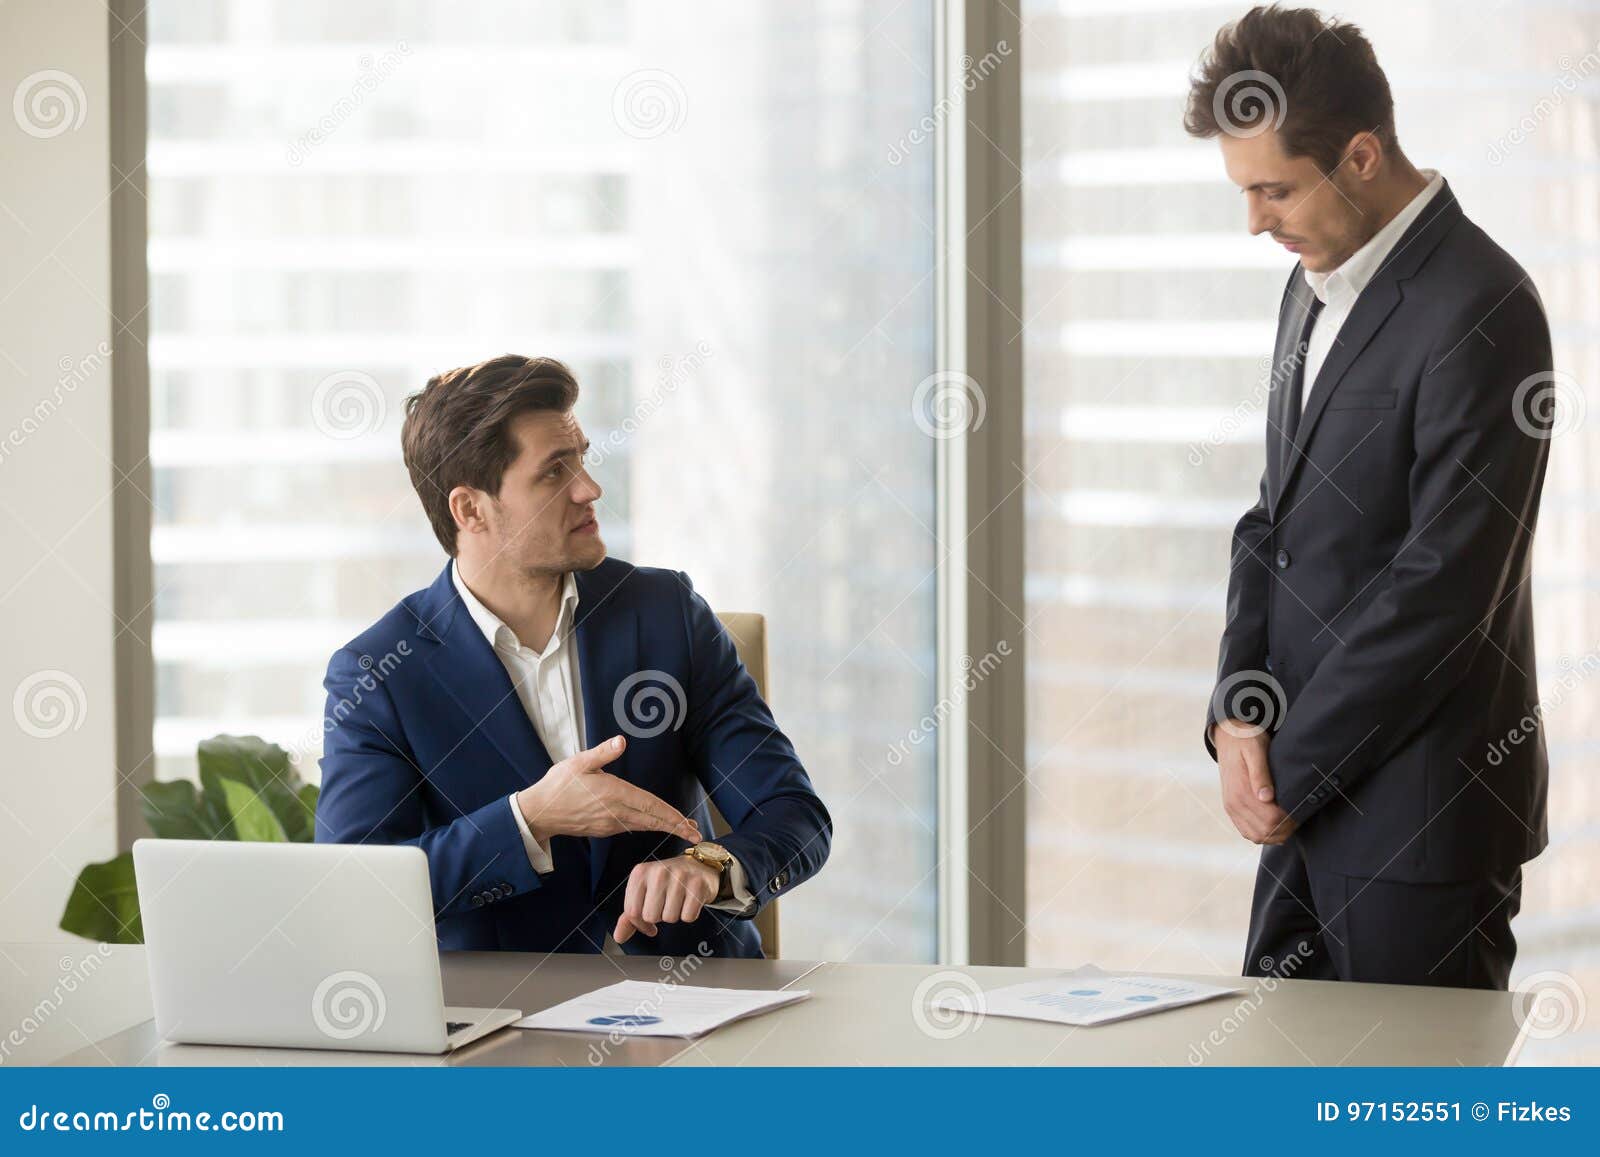 subordinate receiving reprimand from boss for being late, missin